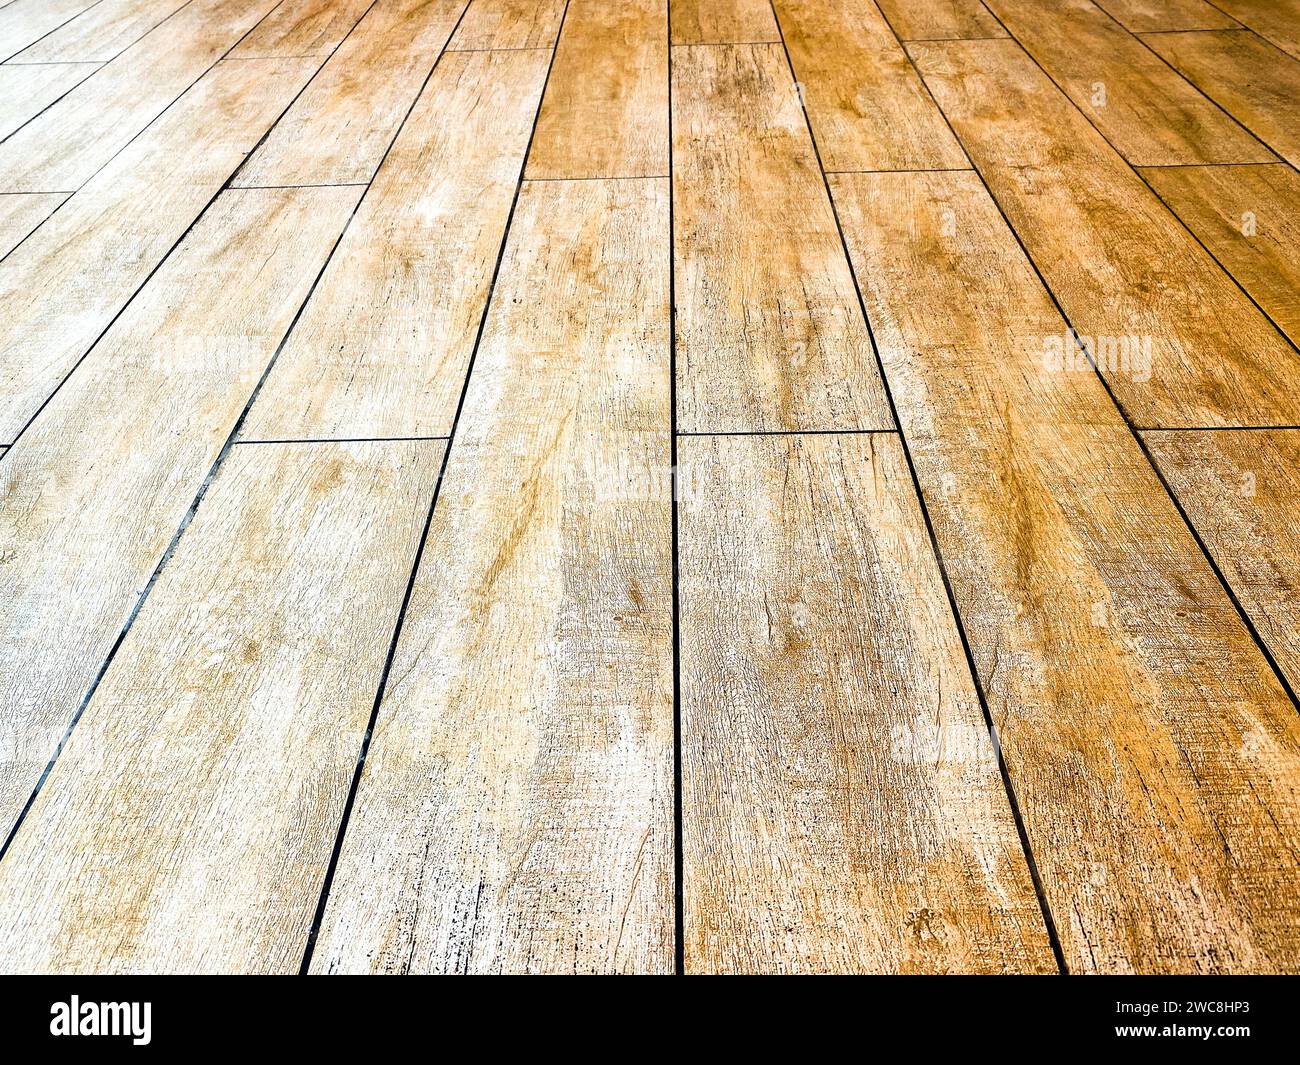 light-colored hardwood floor with a smooth and polished surface, suitable for modern interiors. Stock Photo